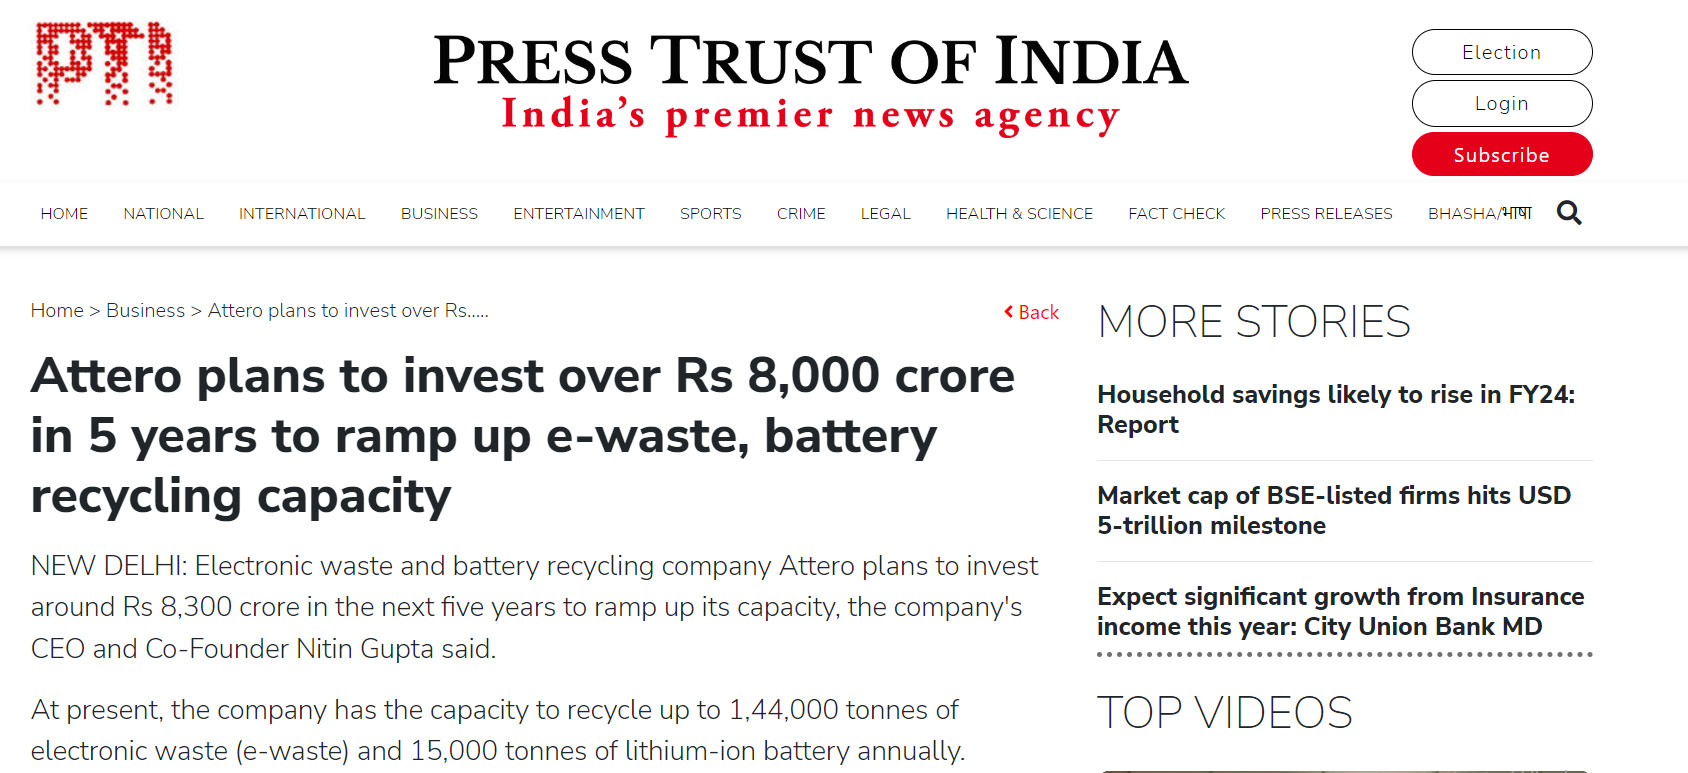 Attero Plans to Invest Over Rs 8,000 Crore in 5 Years to Ramp Up E-Waste, Battery Recycling Capacity